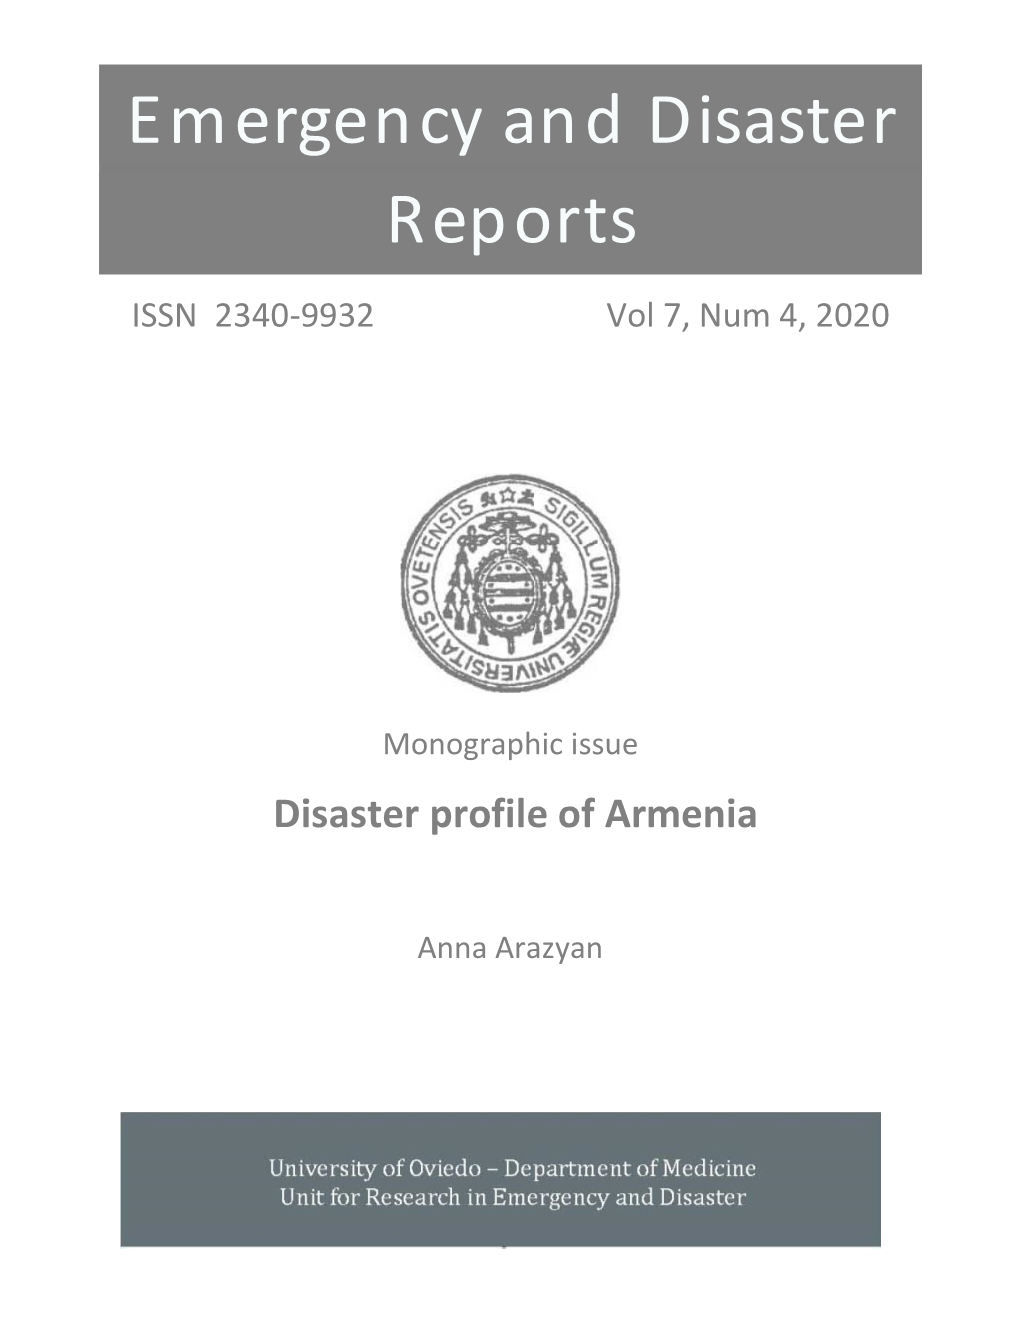 Emergency and Disaster Reports 2020; 7 (4): 3-48